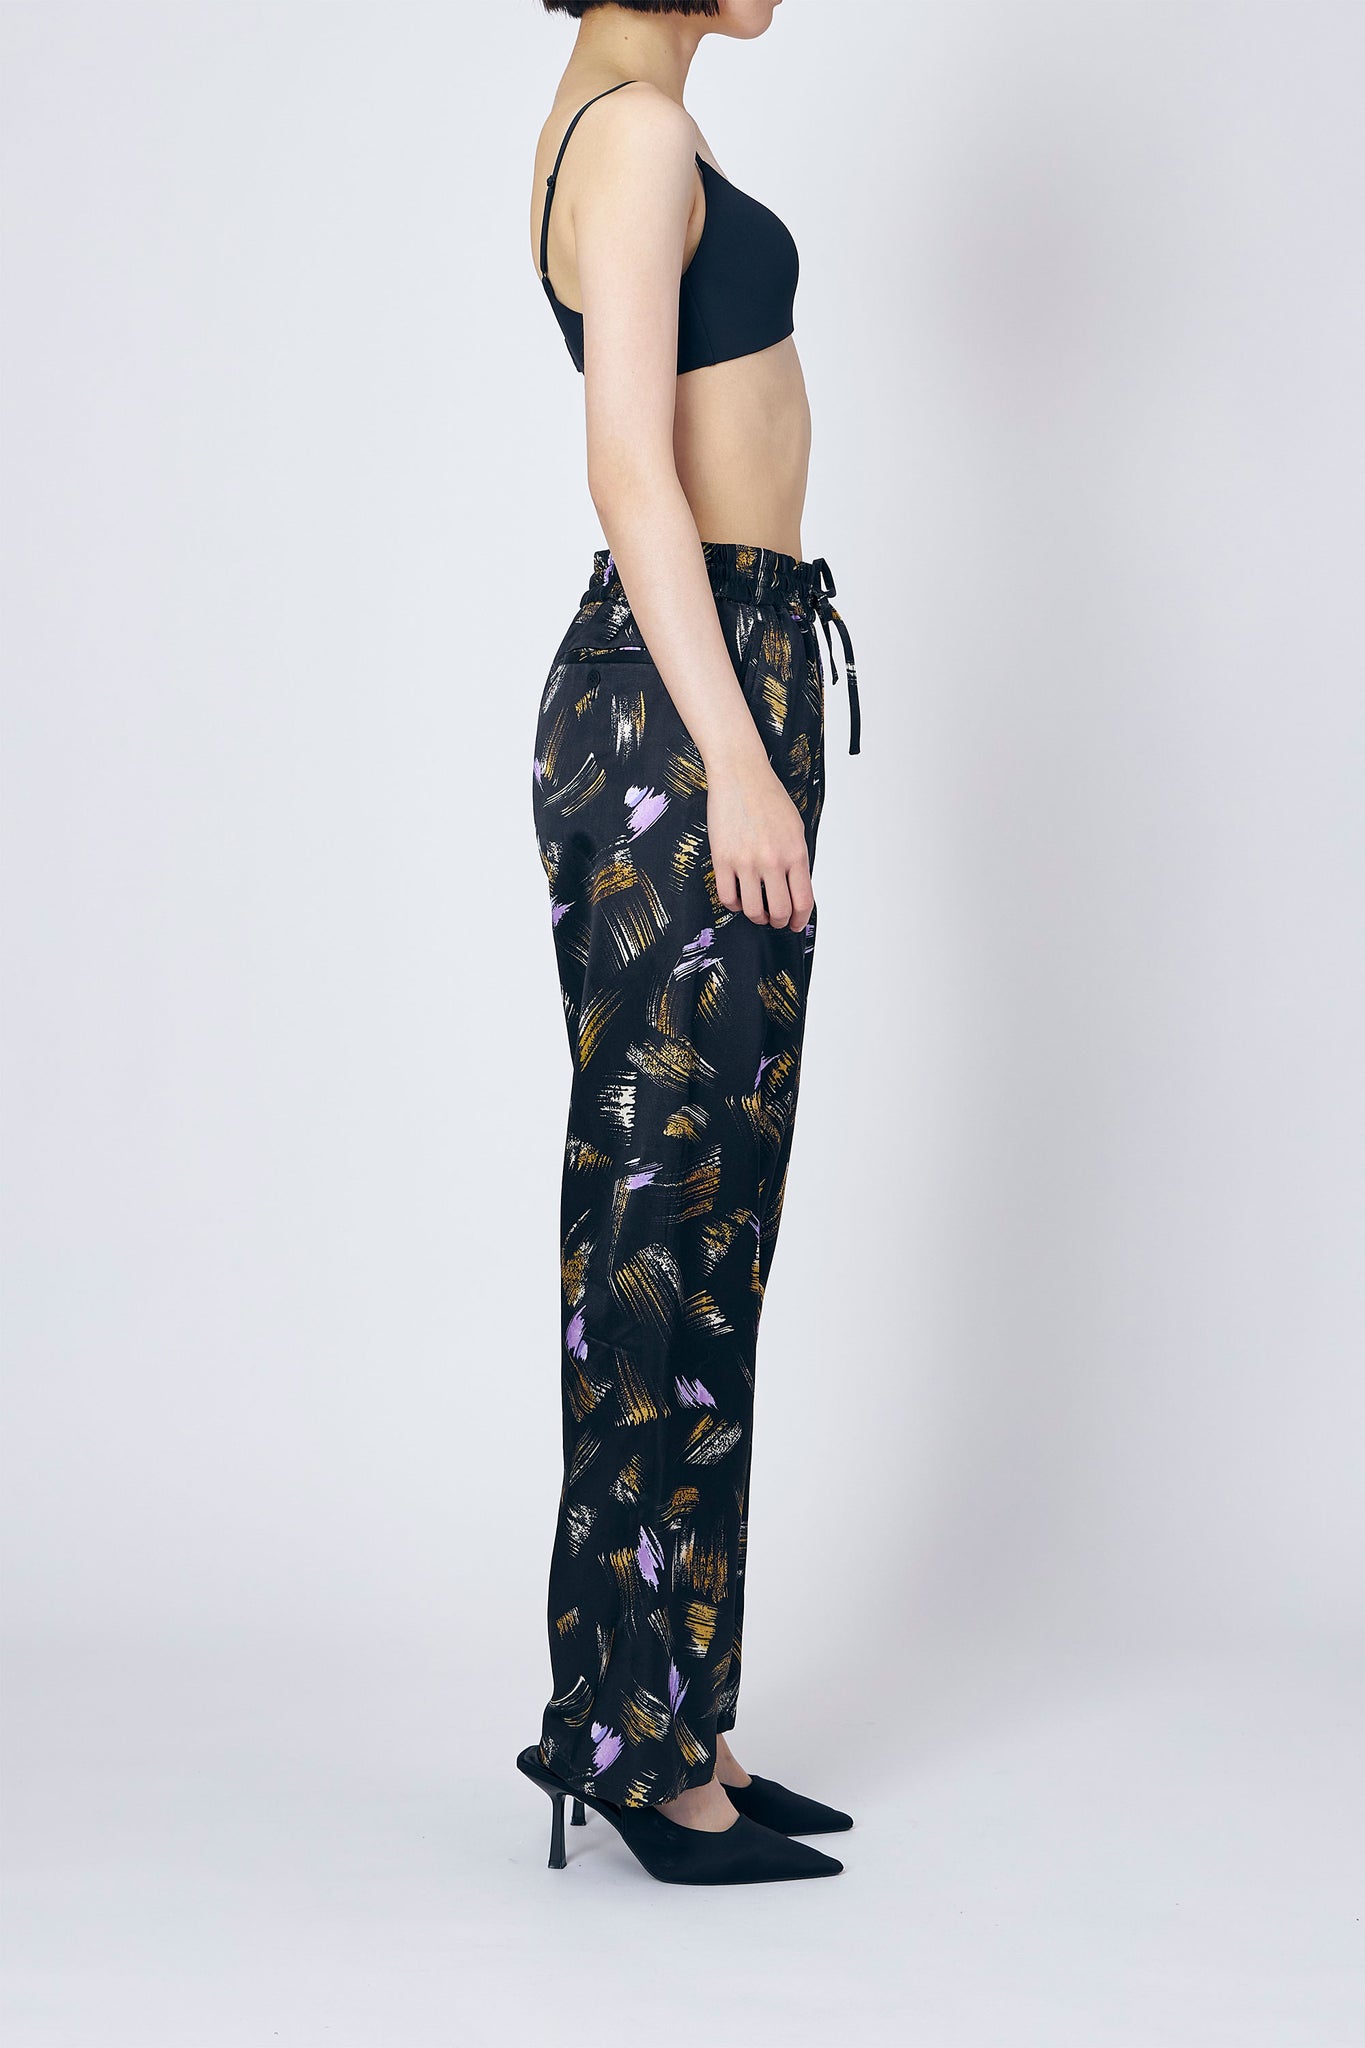 PRINTED RELAX PANTS